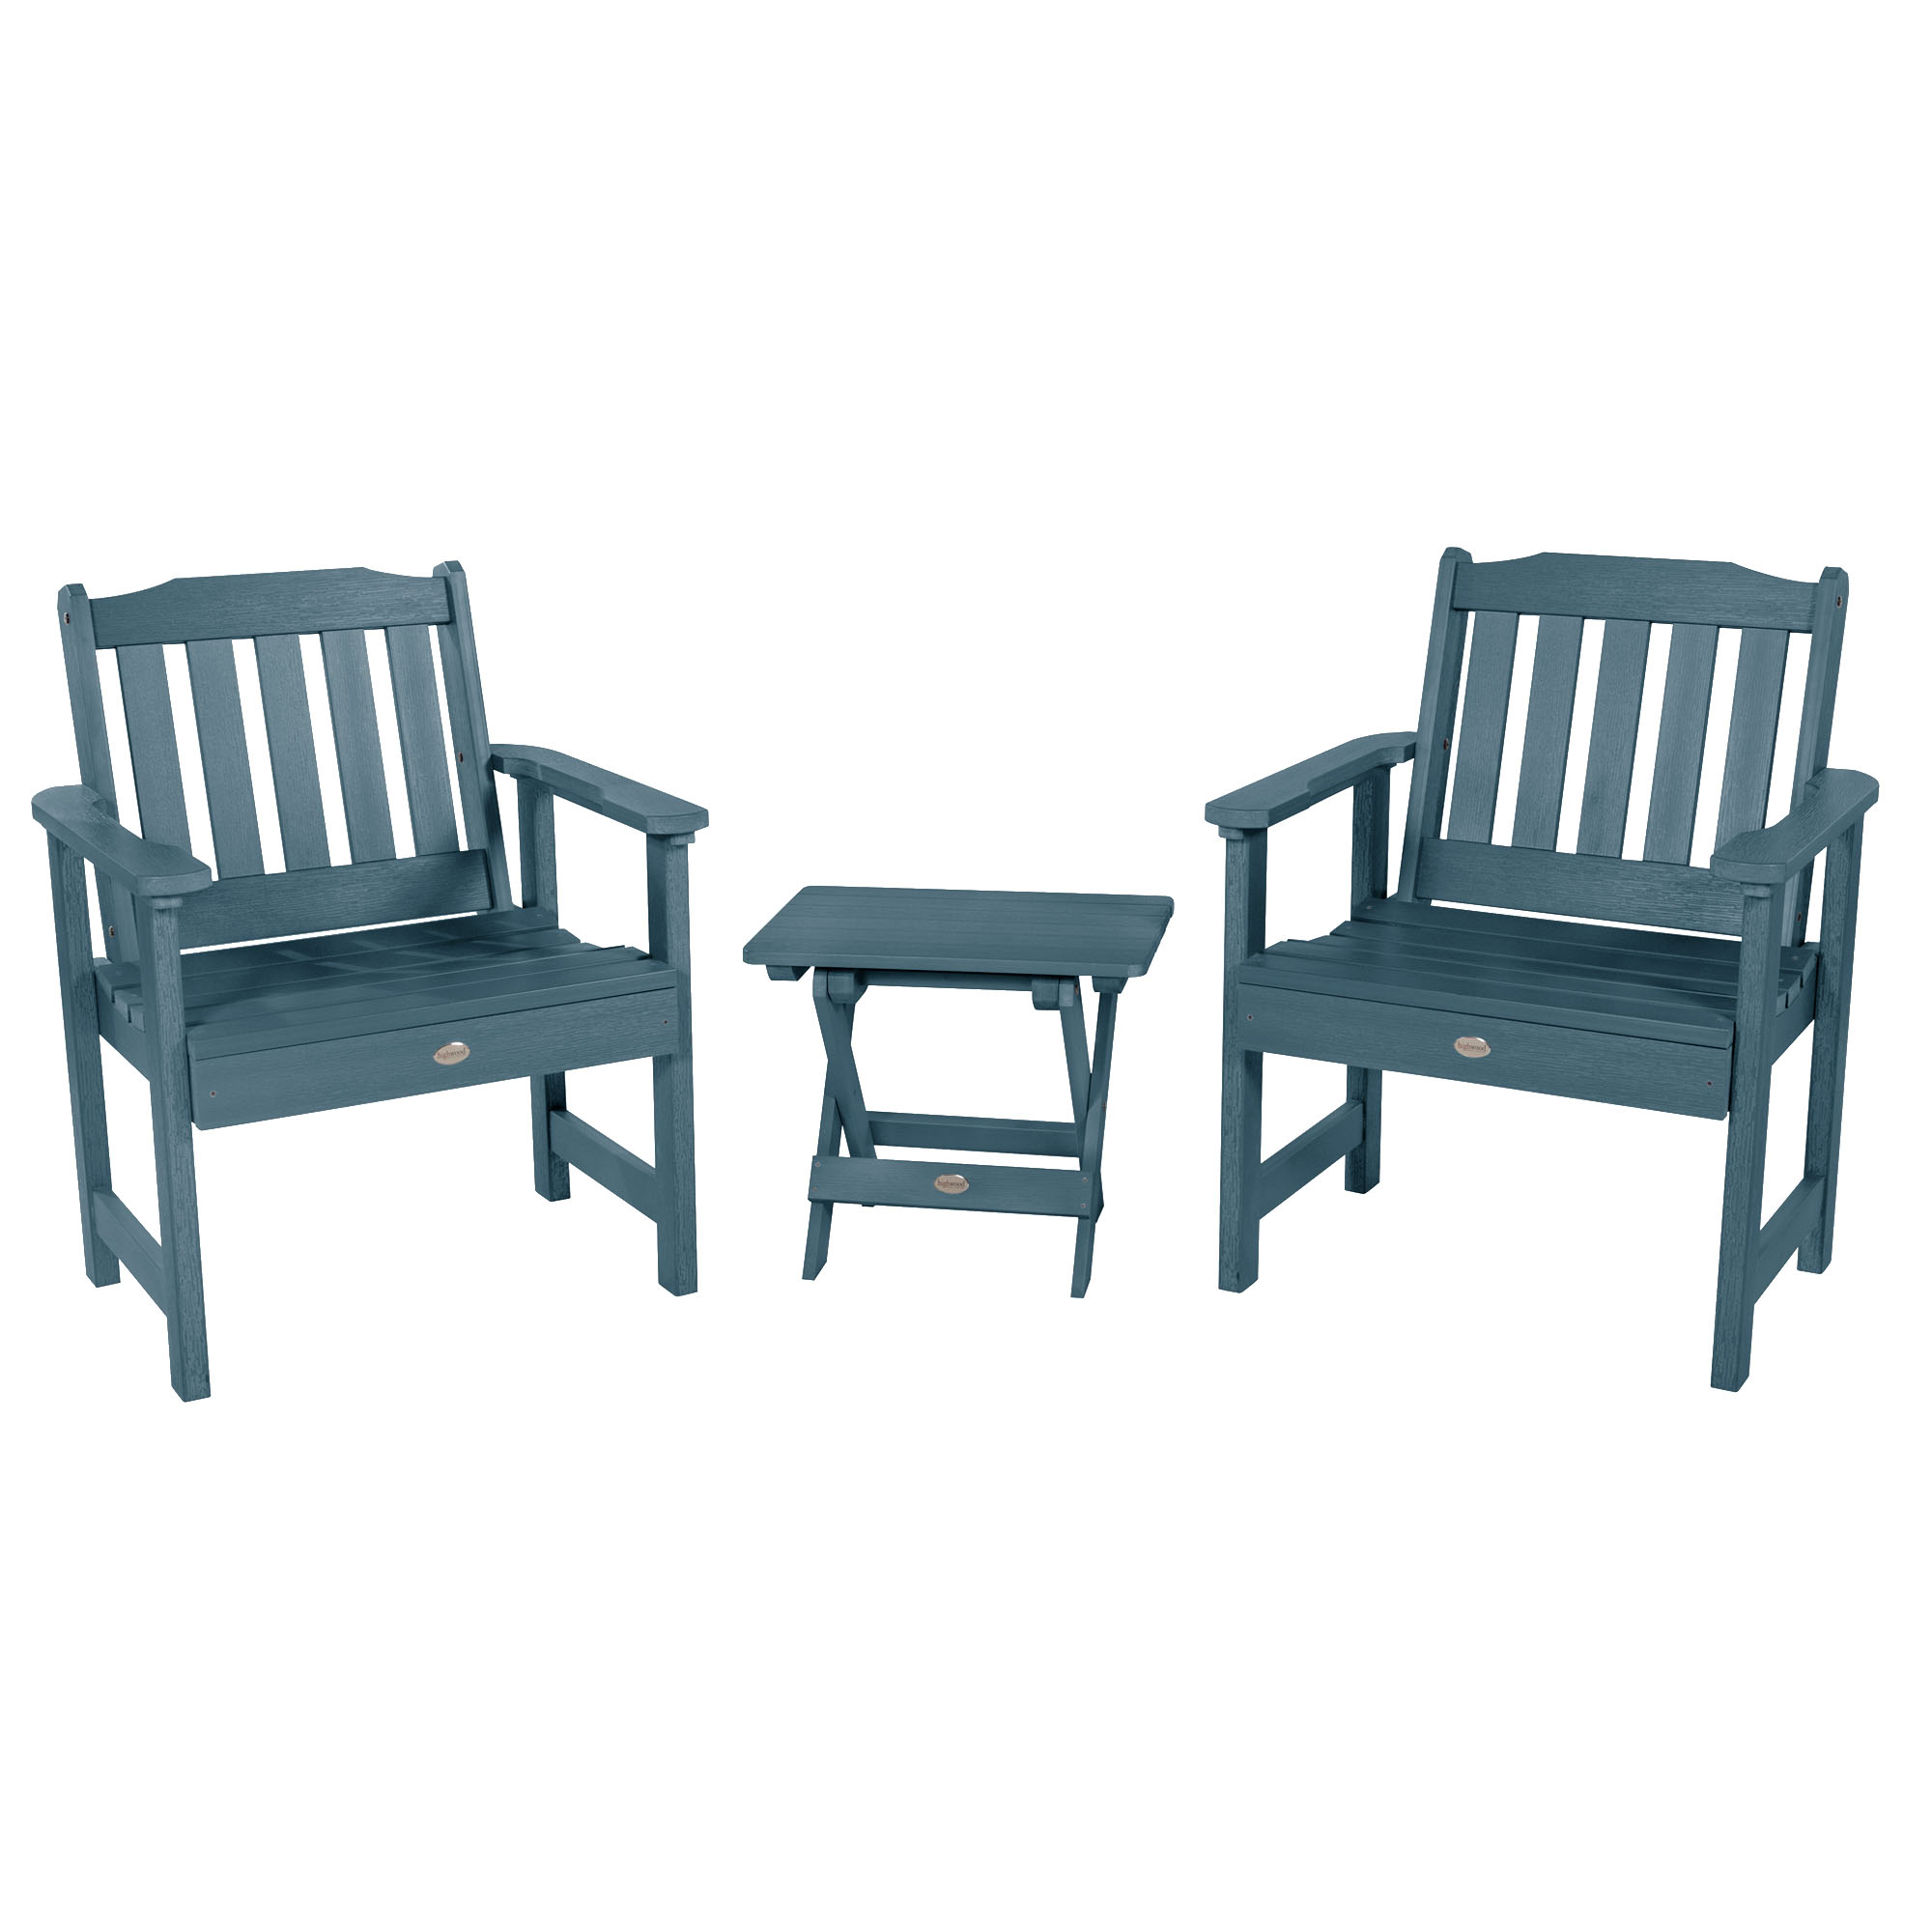 Highwood 3pc Lehigh Garden Chair Set with 1 Folding Adirondack Side Table - image 1 of 6